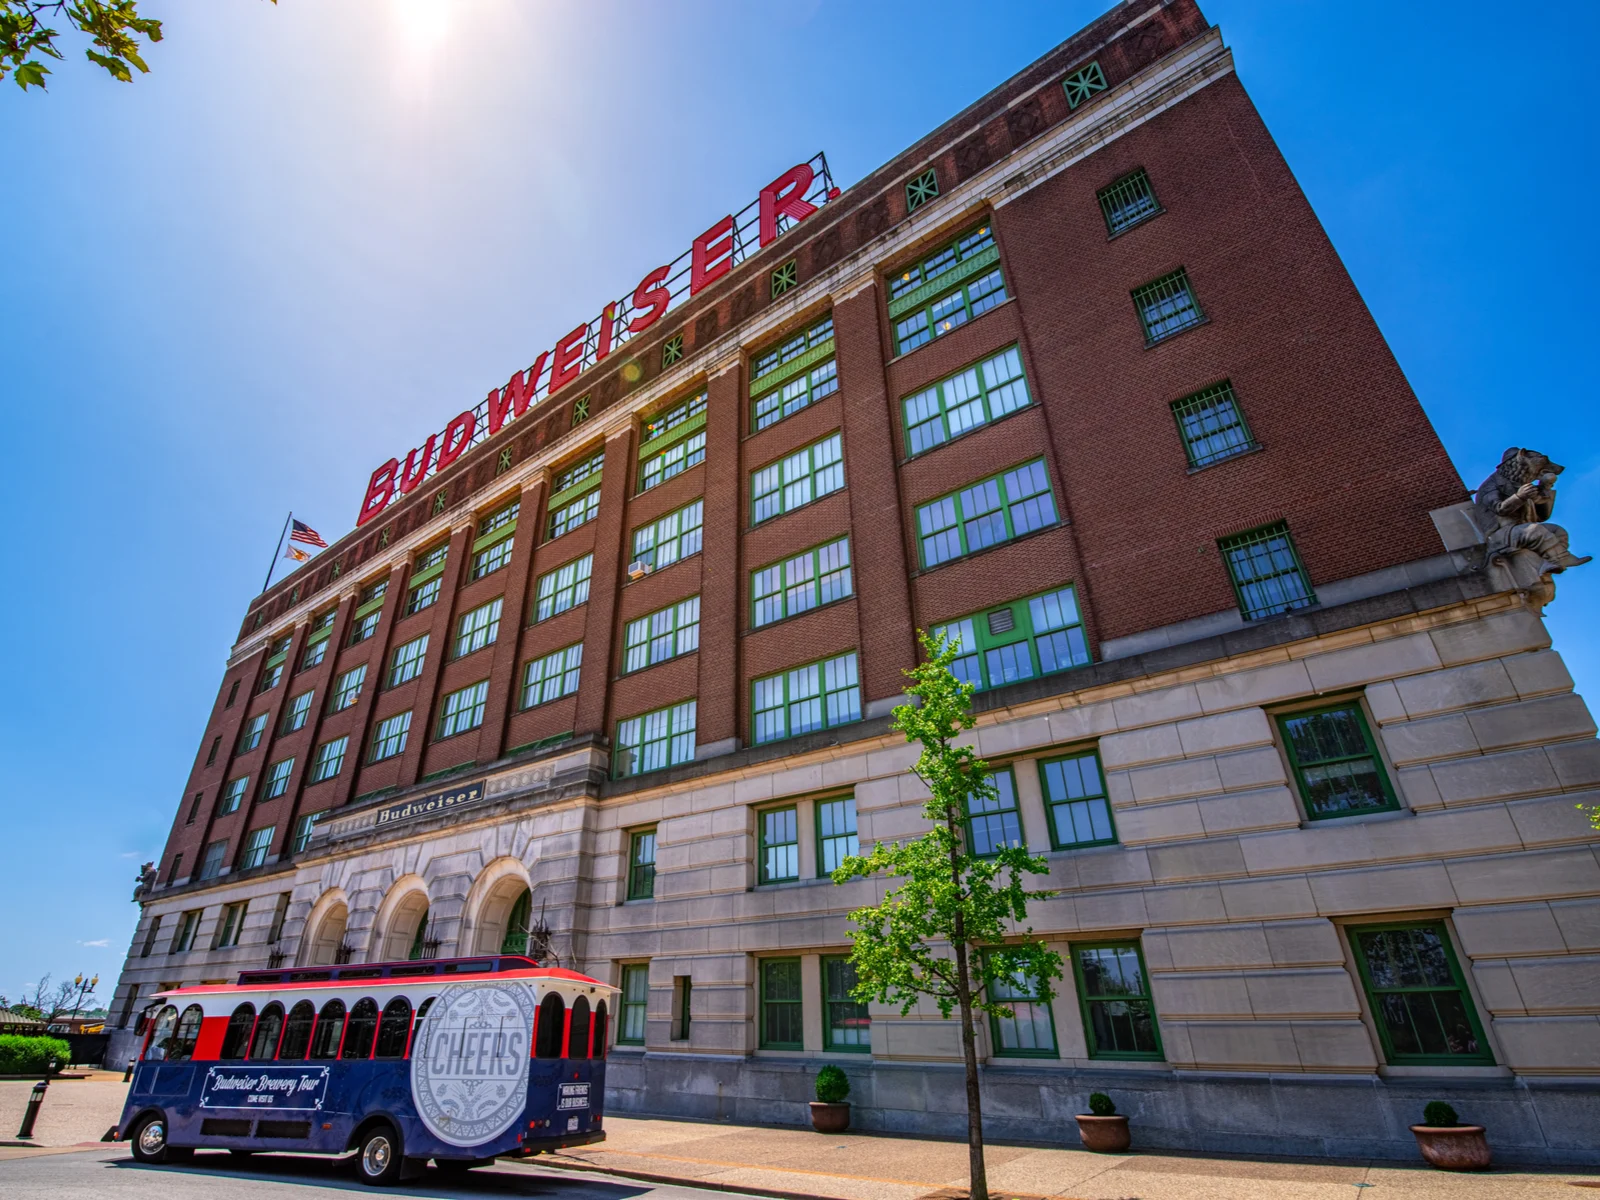 A tour bus parked in front of Budweiser Bottling Facility, one of the oldest breweries and one of the best things to do in St. Louis